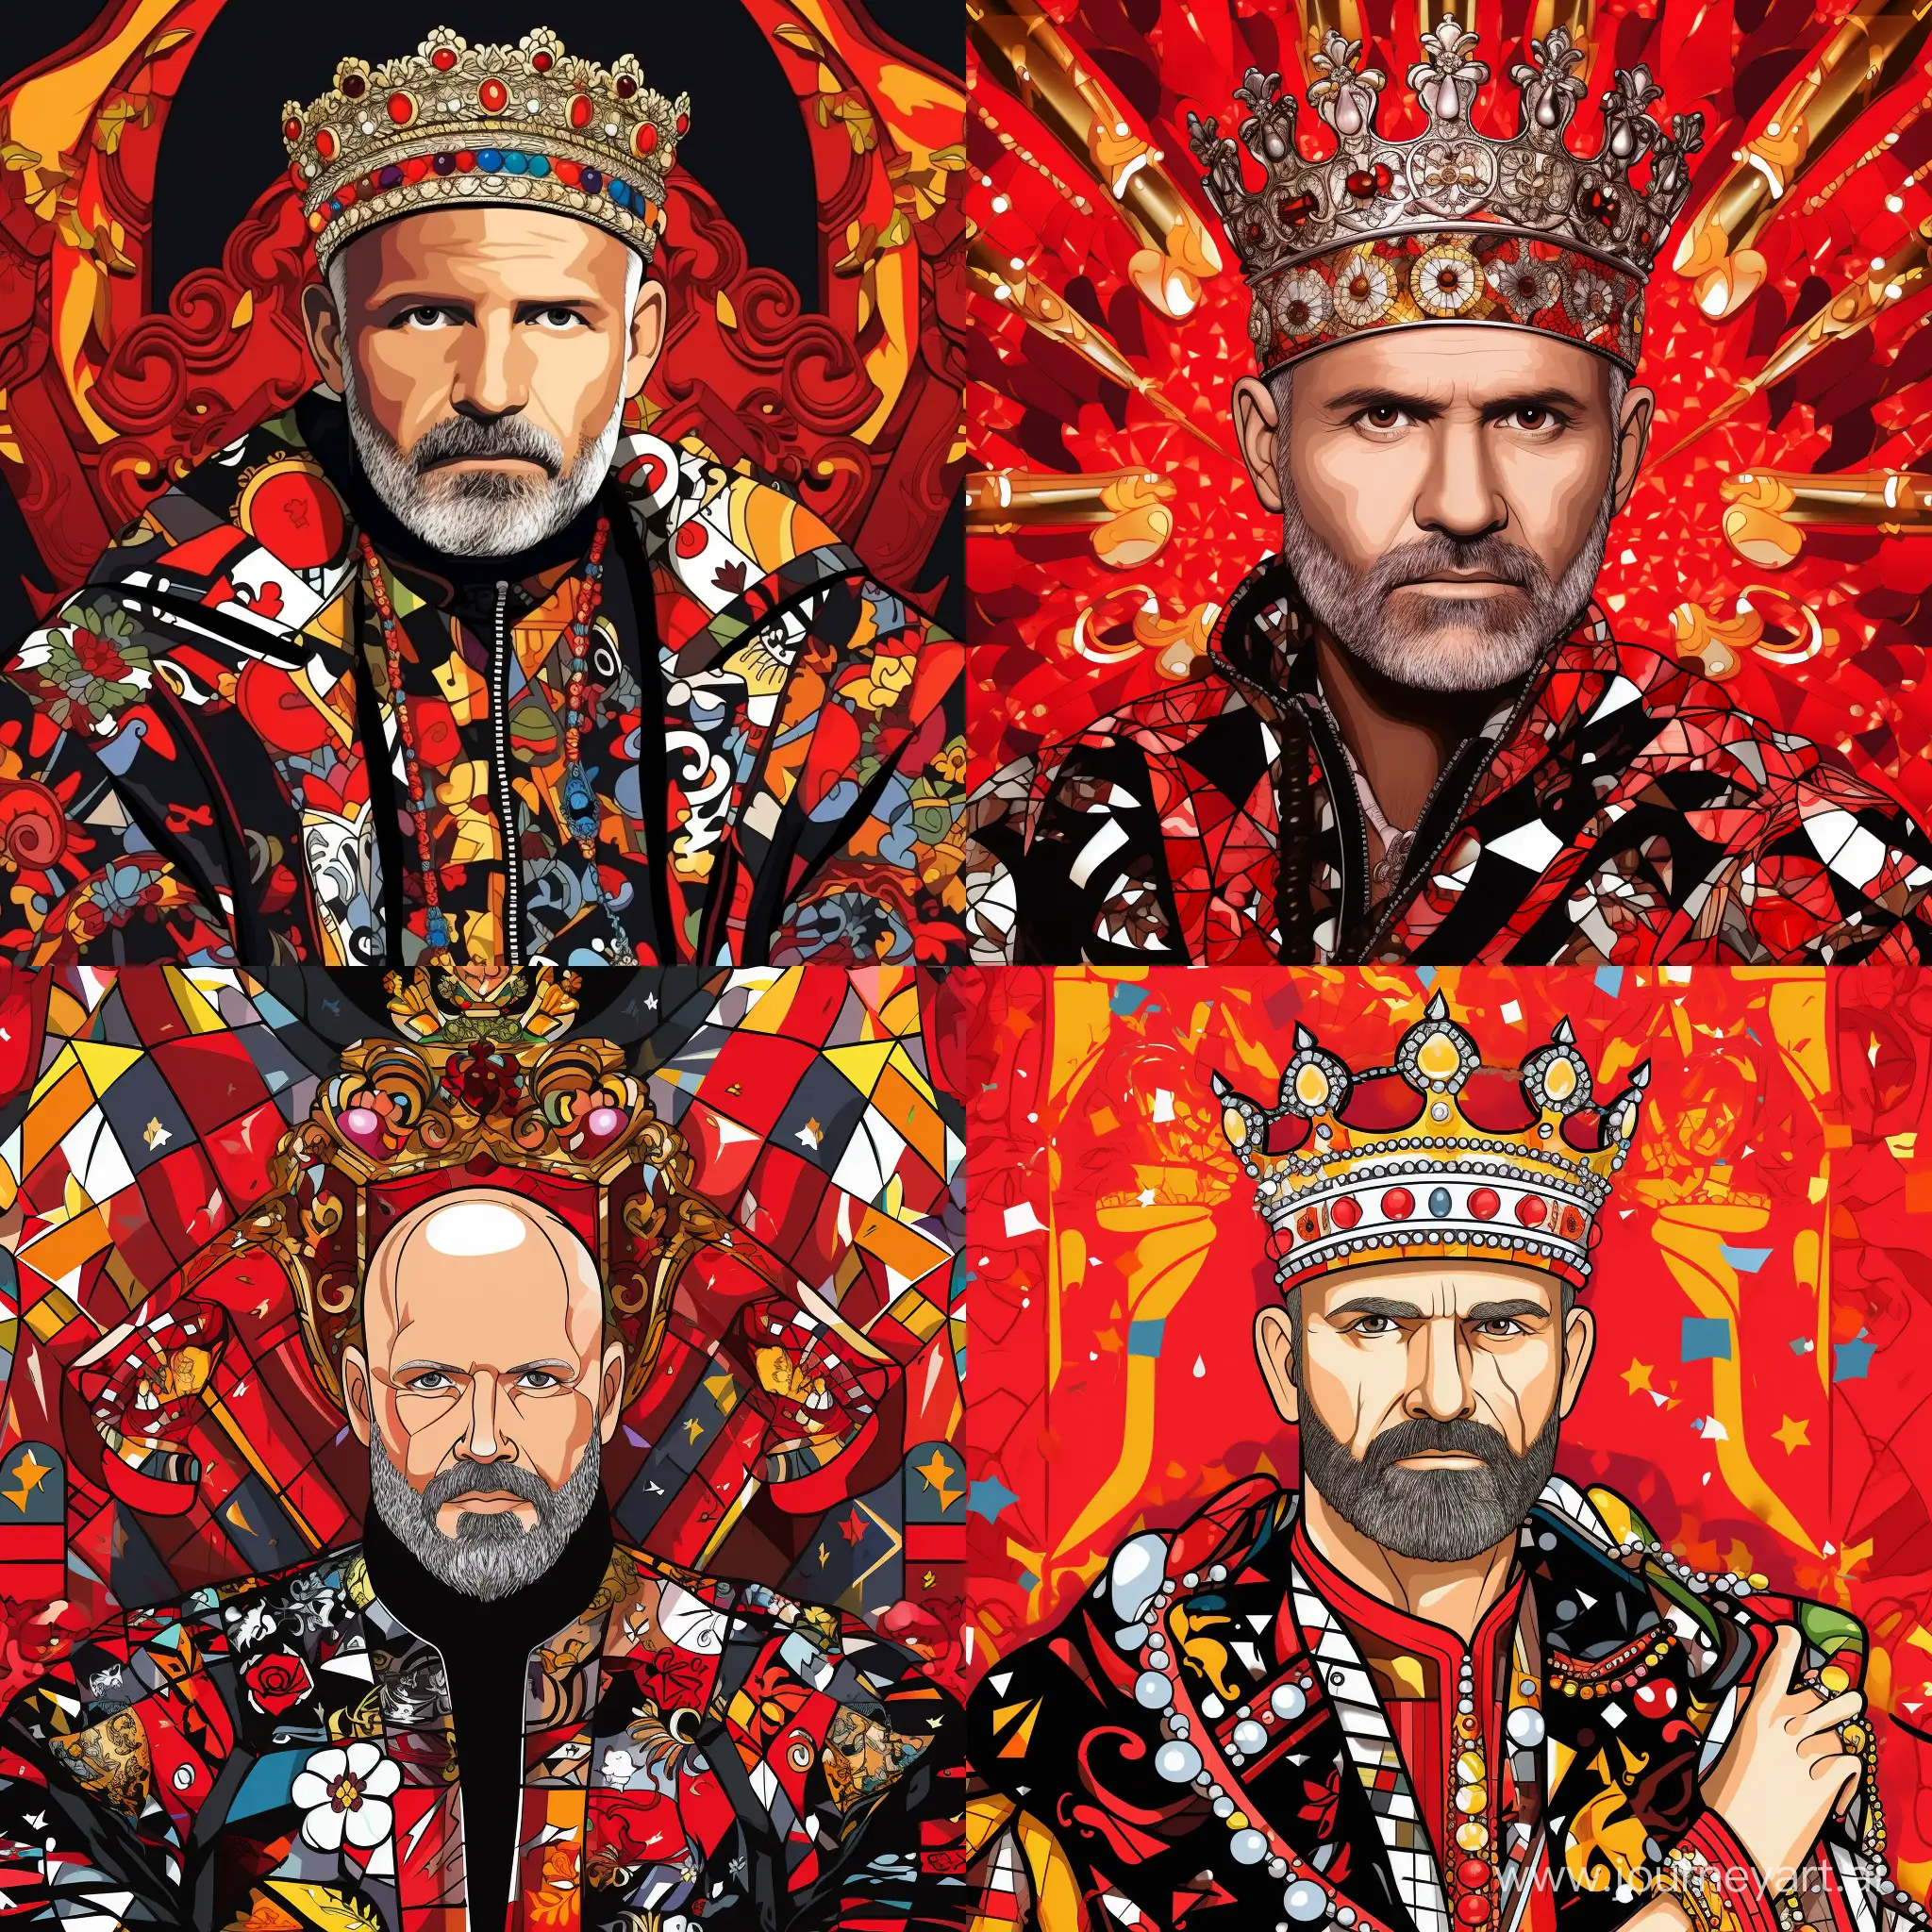 Portrait of Gianni Versace, with a crown on his head, many details, complex, on the background of a pattern of clubs, accessories from Versace, colors black, white, red, gray, cartoon style, pop art style, fashion illustration style